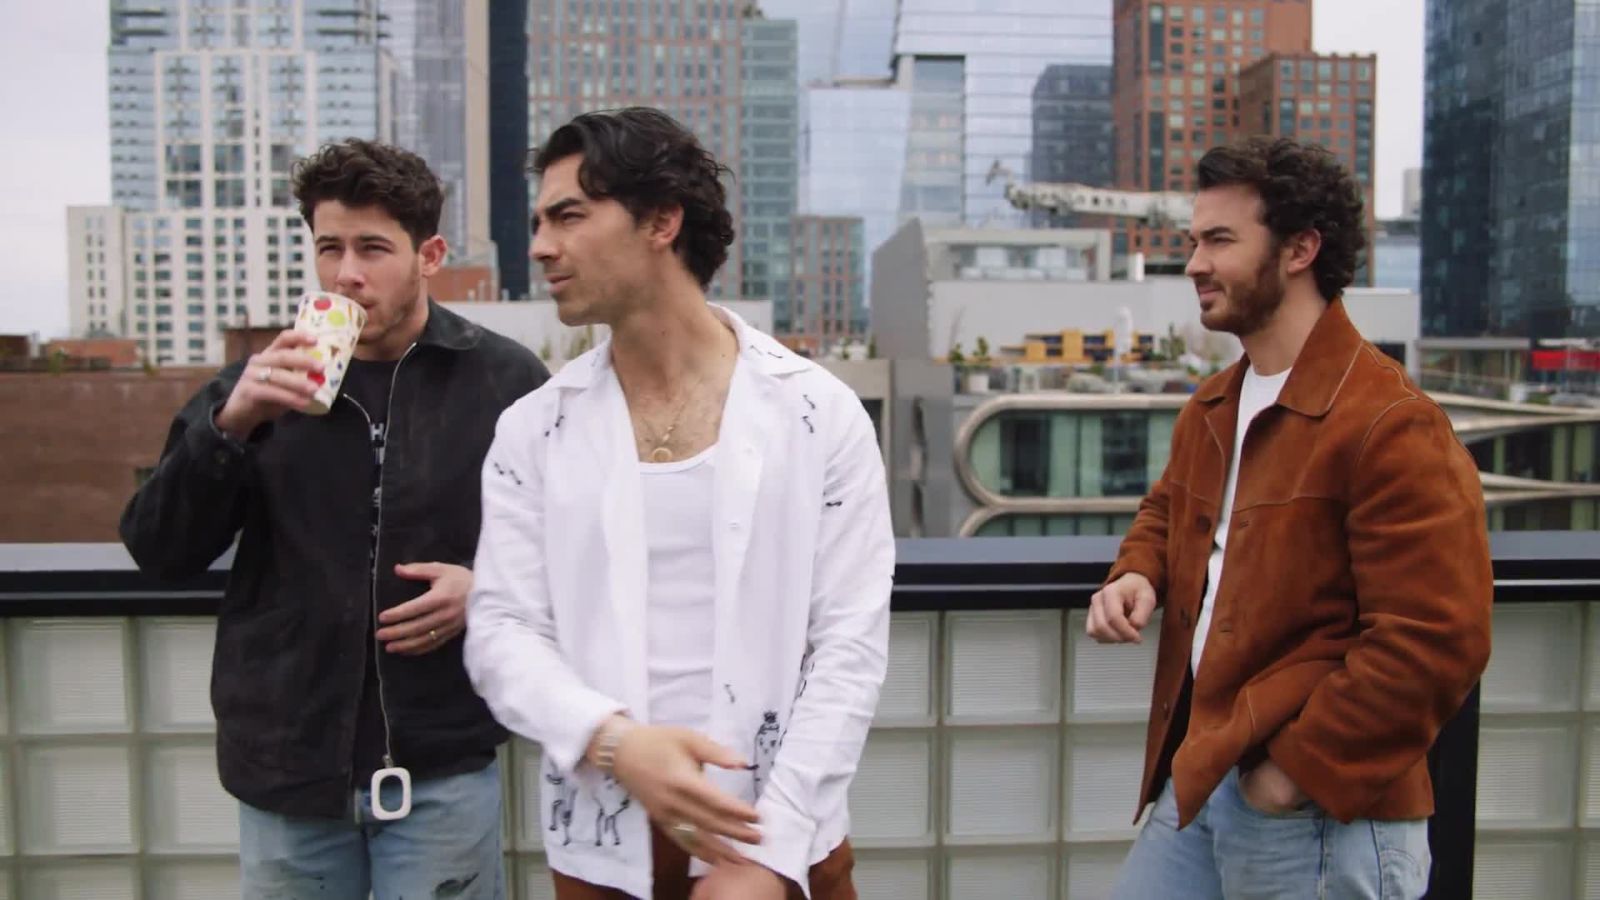 24 Hours of Sparkly Polos and Saturday Night Live Rehearsals with the Jonas Brothers